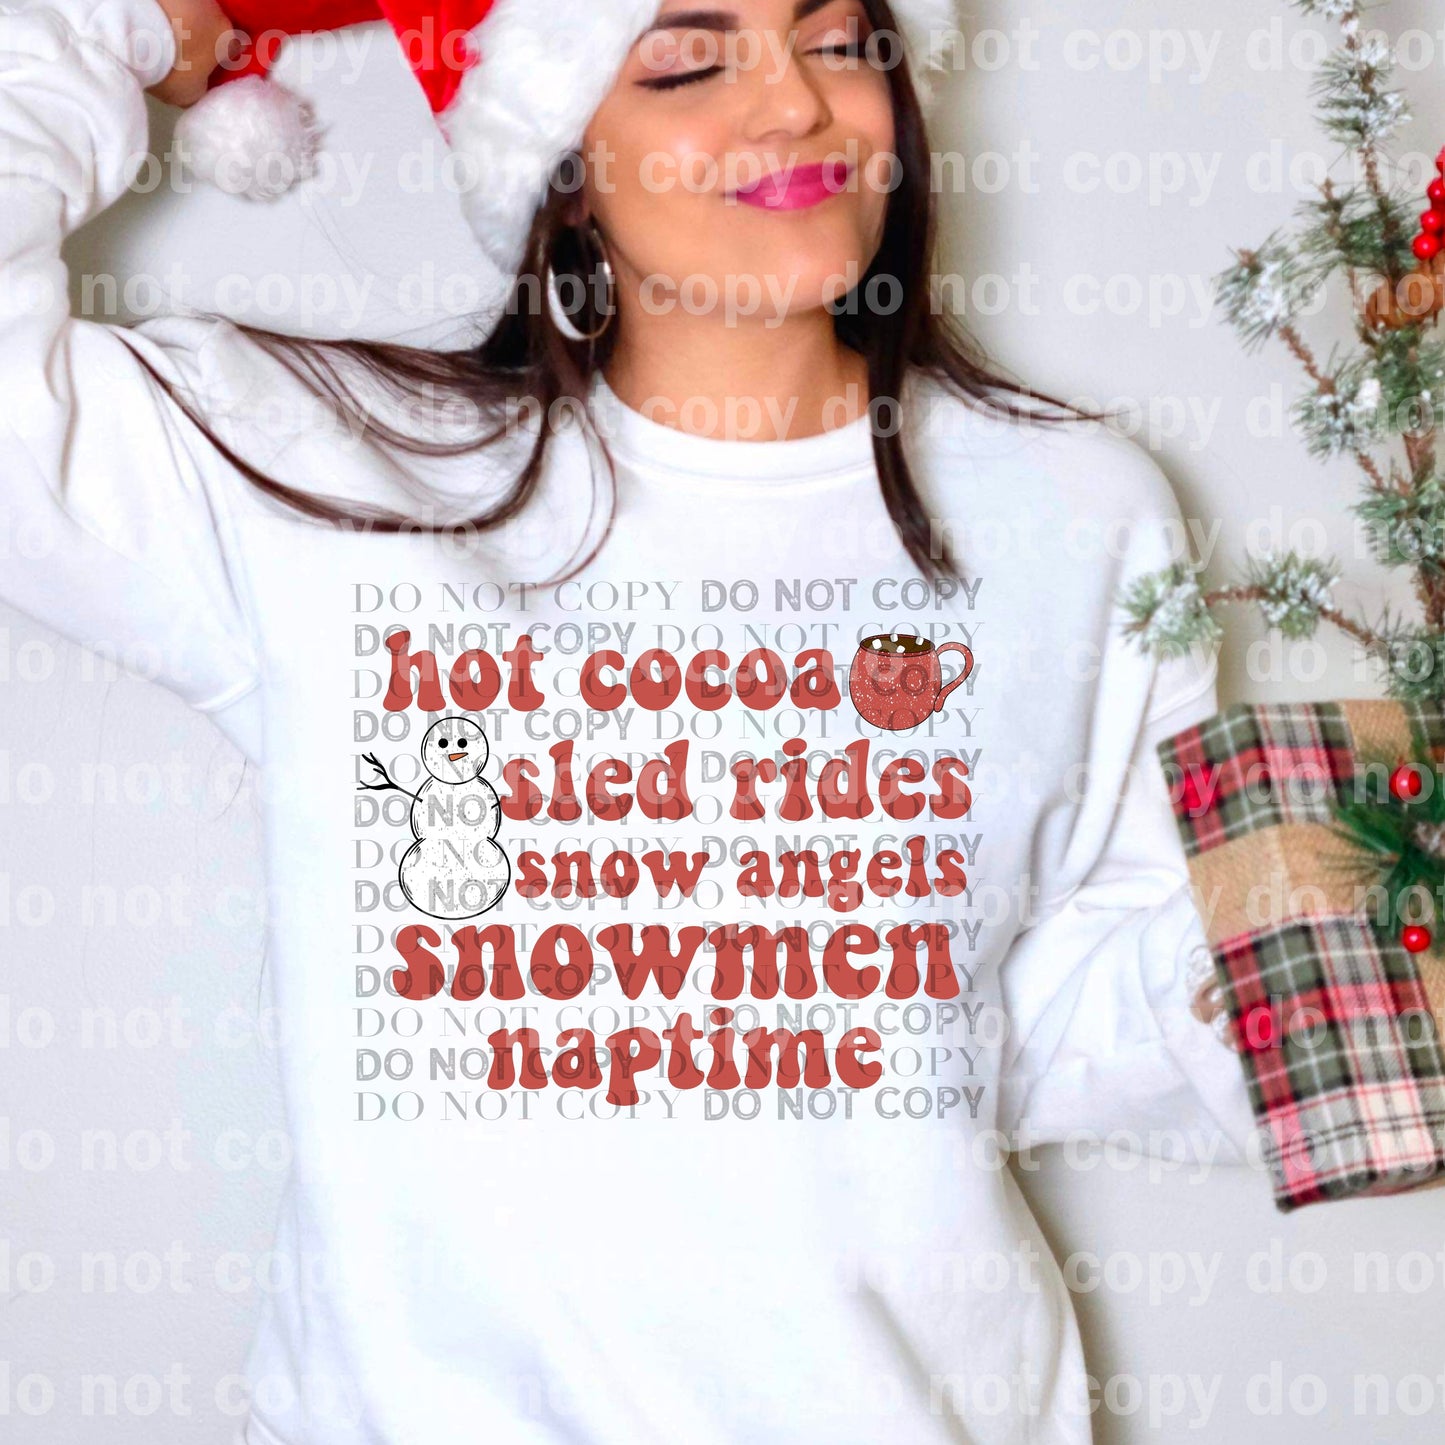 Hot Cocoa Sled Rides Snow Angels Snowmen Naptime Dream Print or Sublimation Print